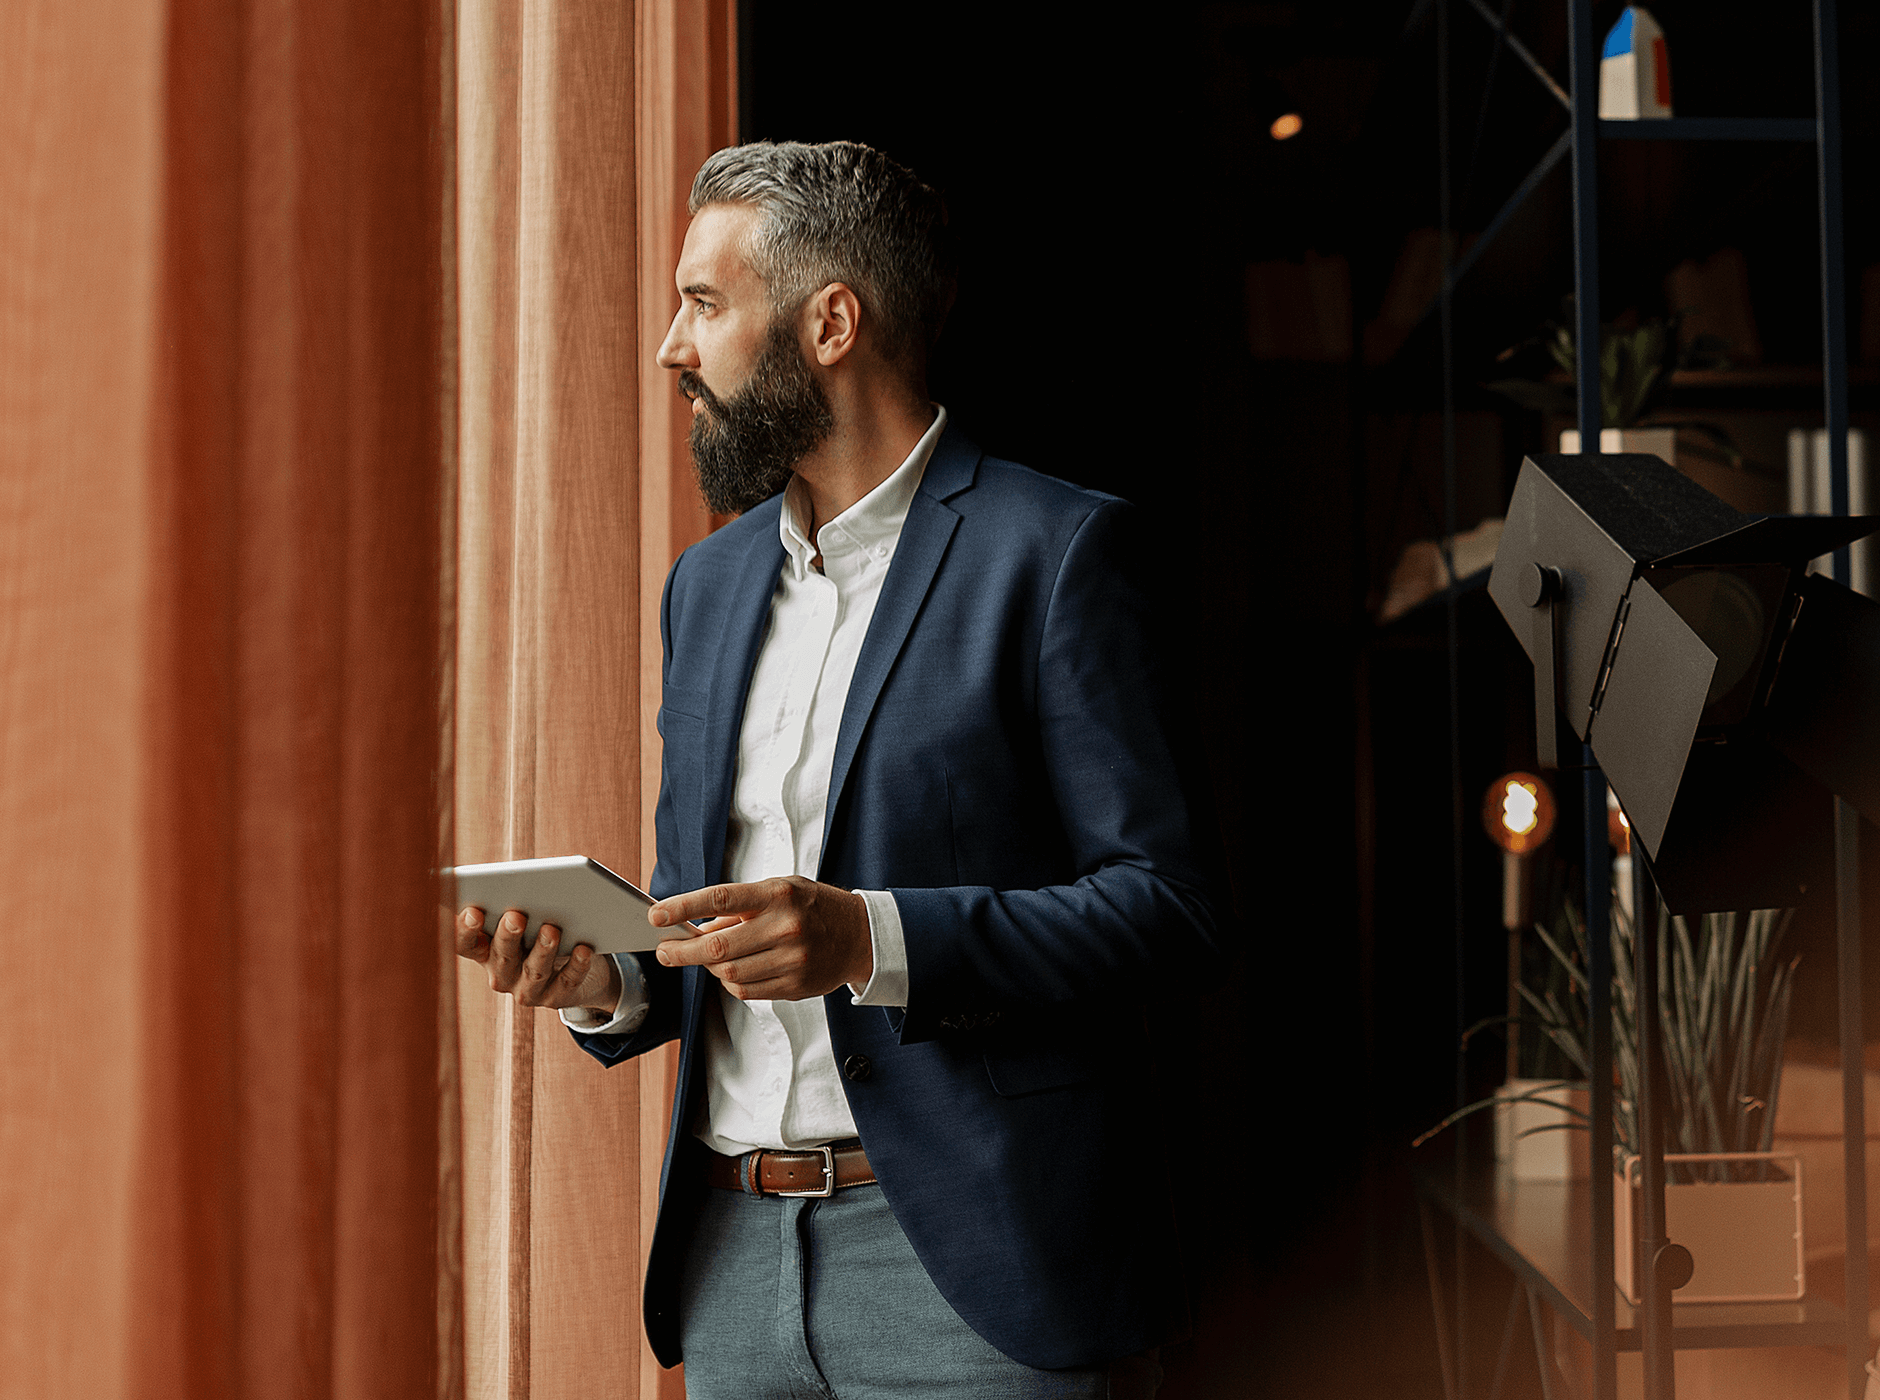 bearded business man standing with electronic tablet in hand